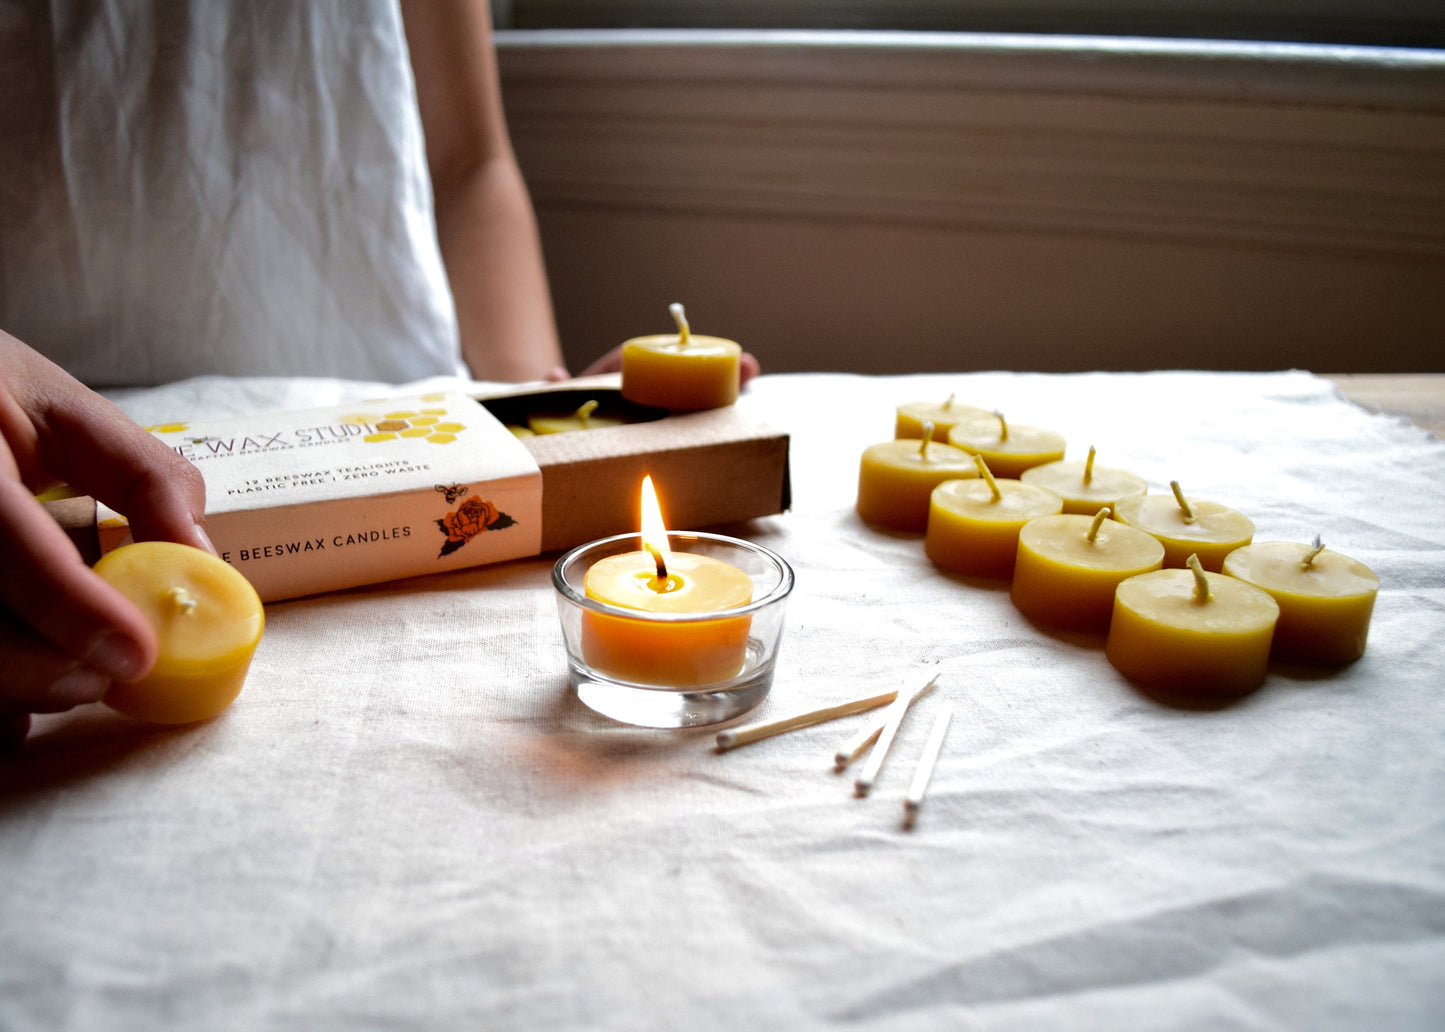 Beeswax Tealights - Candles - Plastic-free Beeswax Tealight Candles Set of 12 / Zero-Waste, Beeswax, Tealights, Tealight Candles